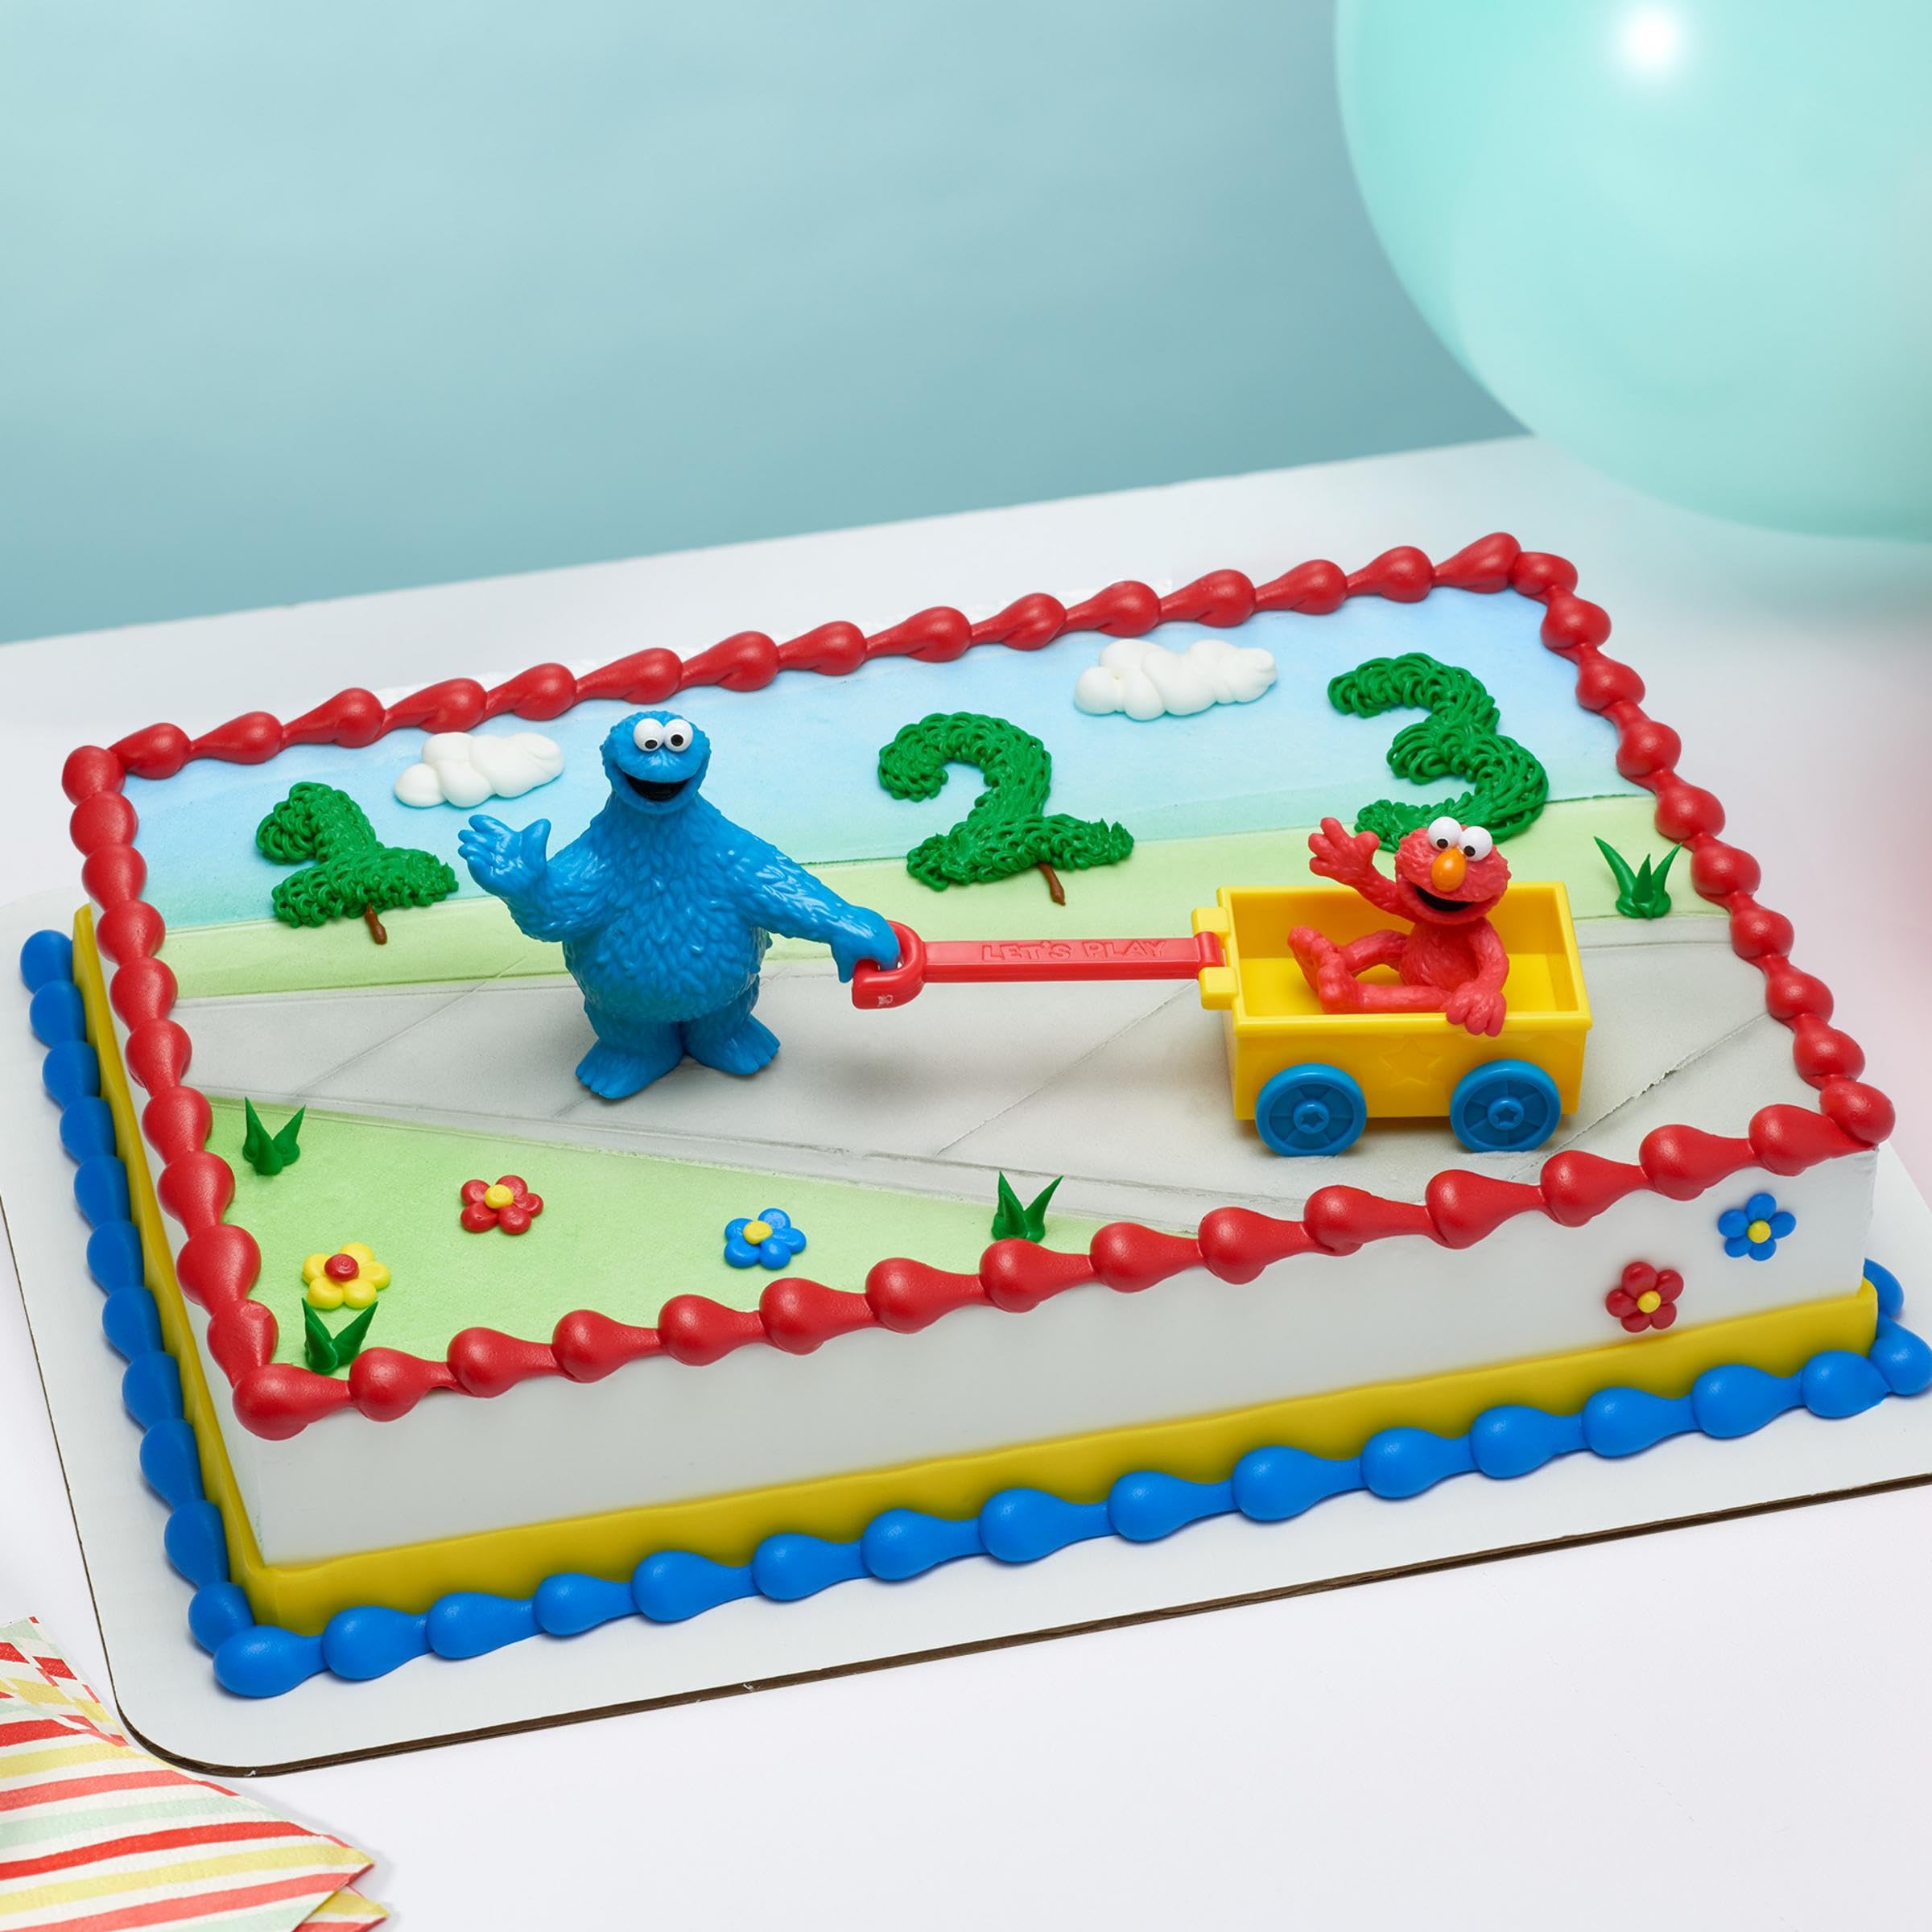 DecoSet® Sesame Street Cake Toppers, 3-Piece Birthday Topper with Elmo and Cookie Monster